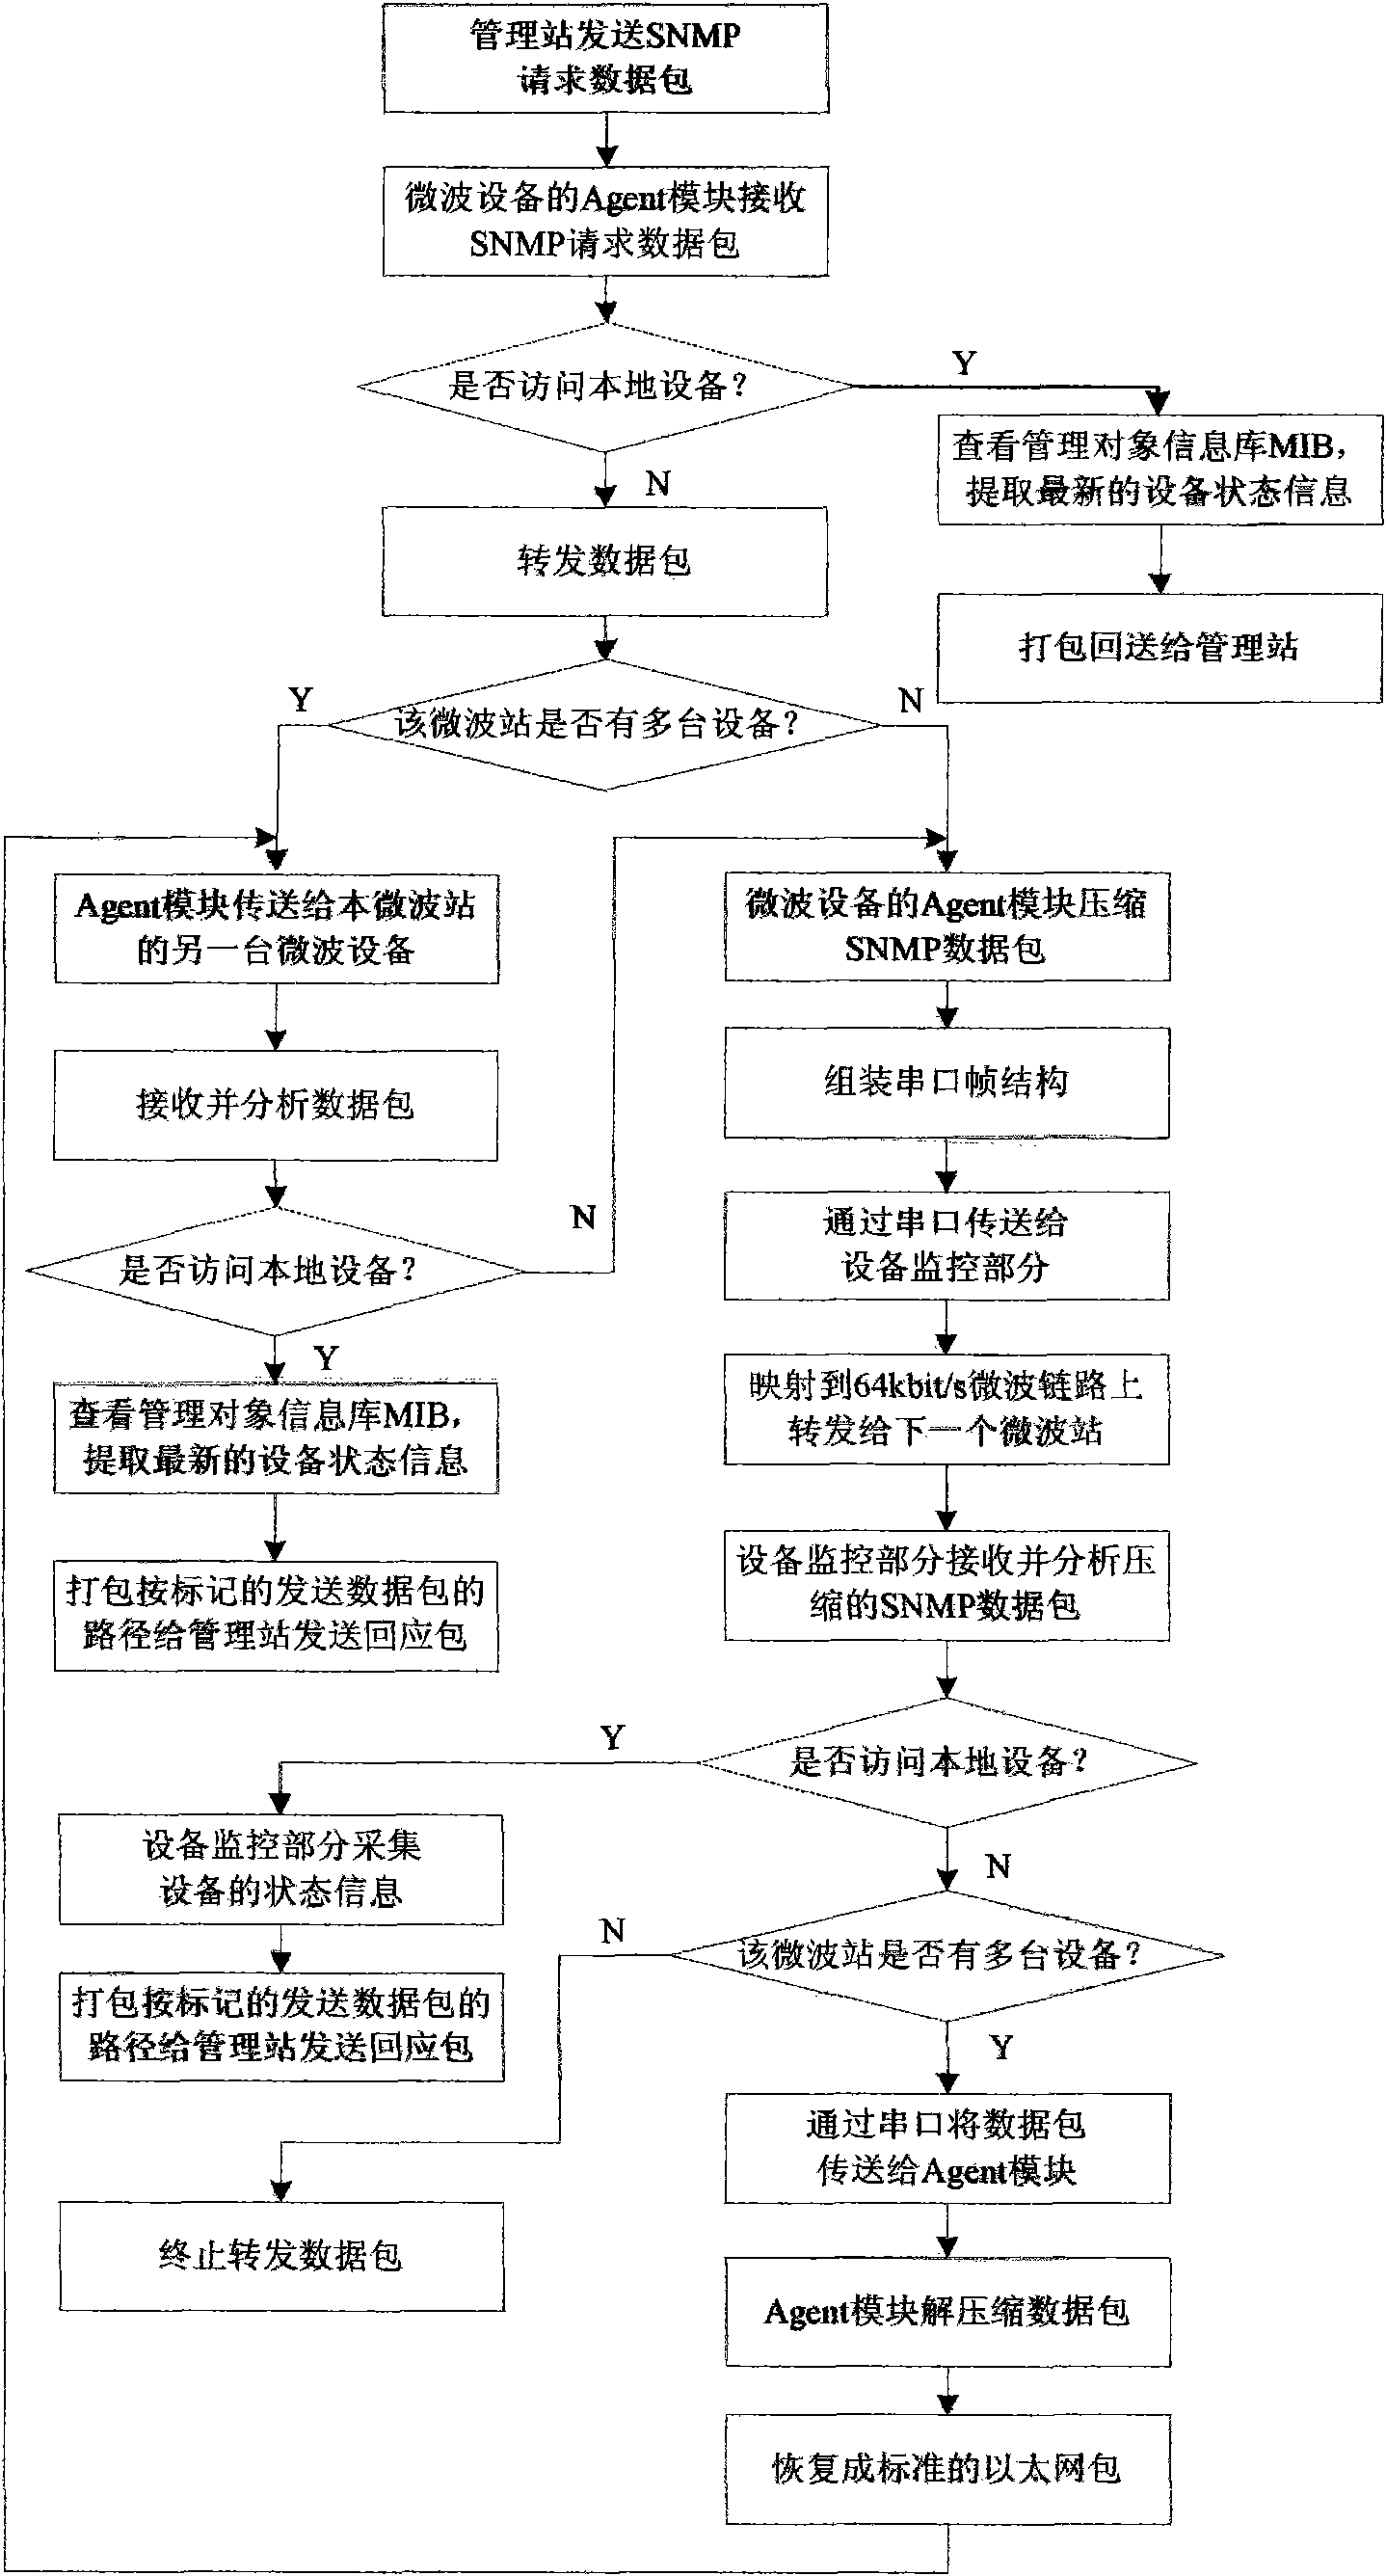 Ethernet network packet fast-forwarding realization method based on microwave facility network management system